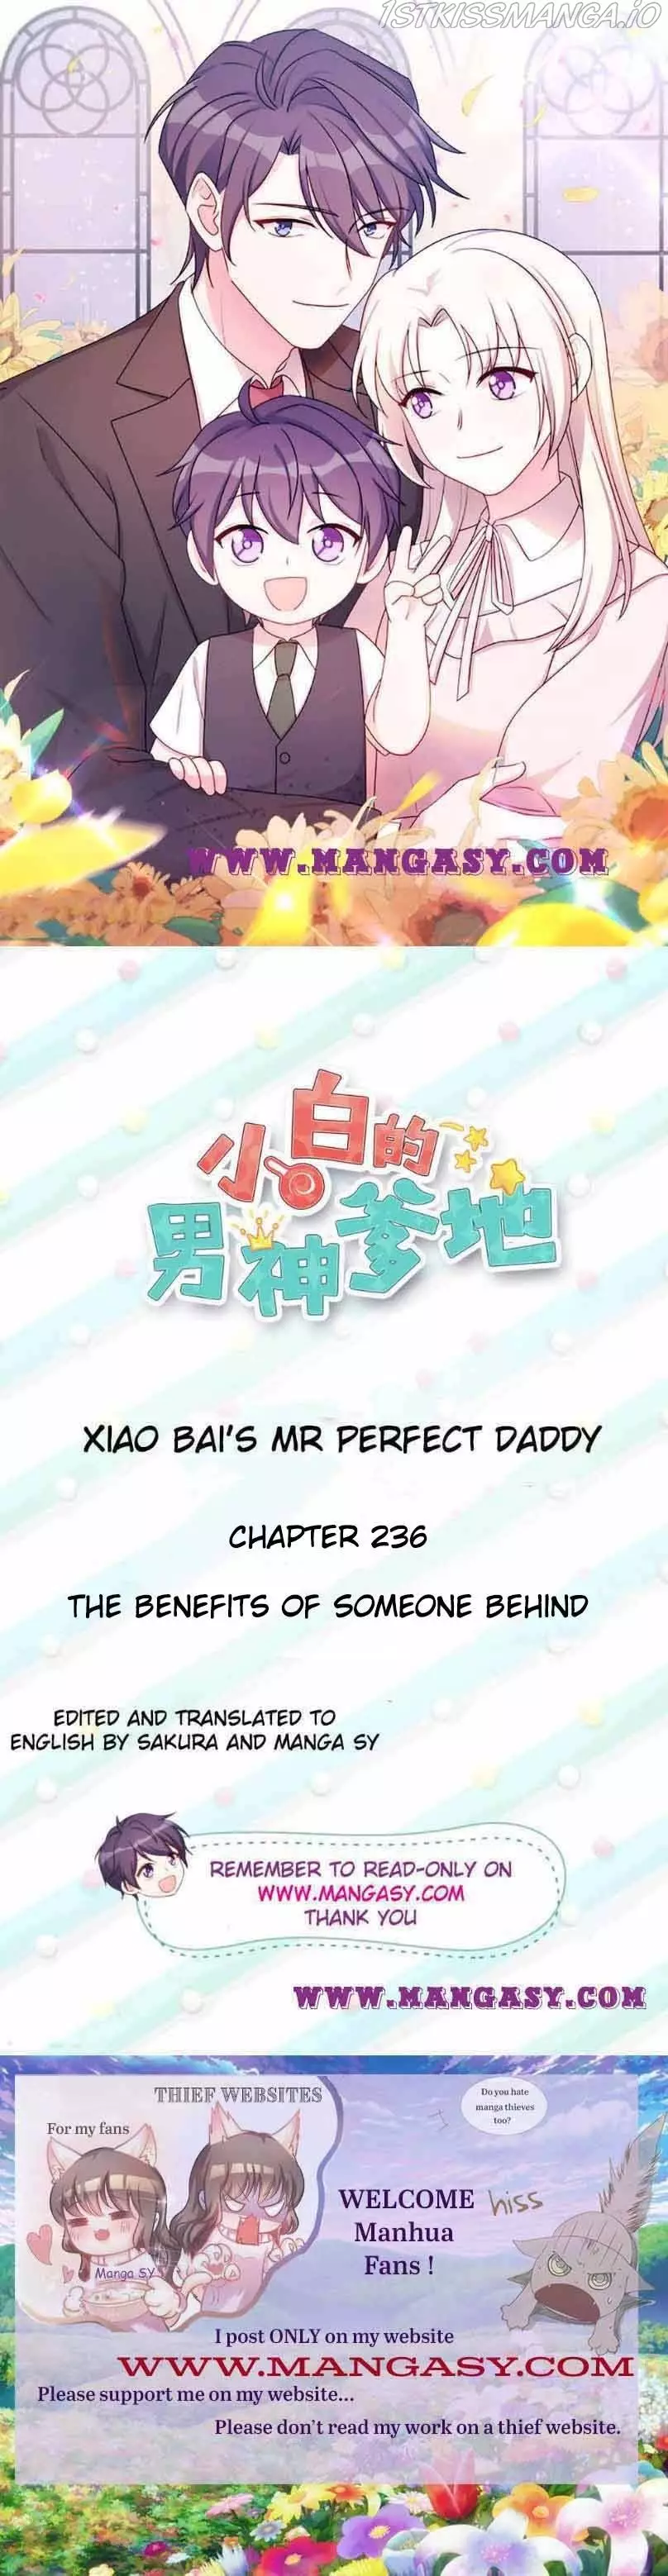 Xiao Bai’S Father Is A Wonderful Person - 236 page 1-2fab9afe